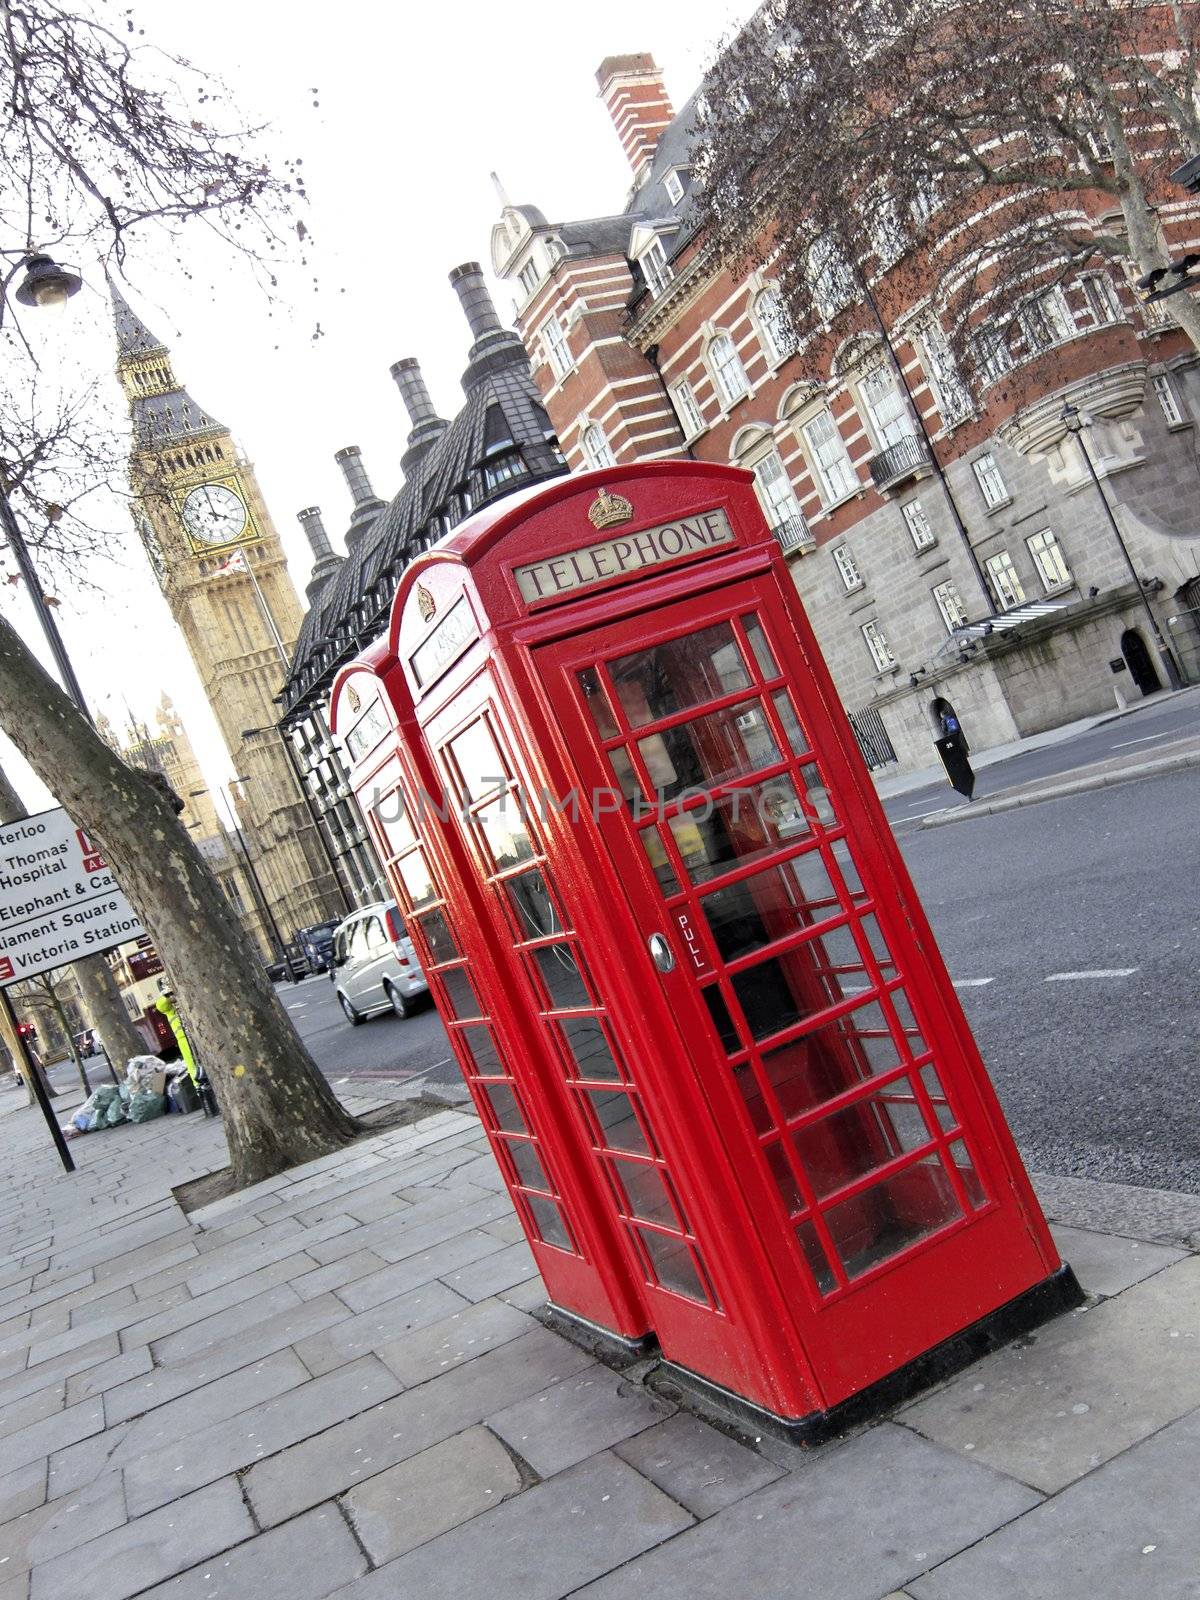 Telephone boxes in London by dutourdumonde